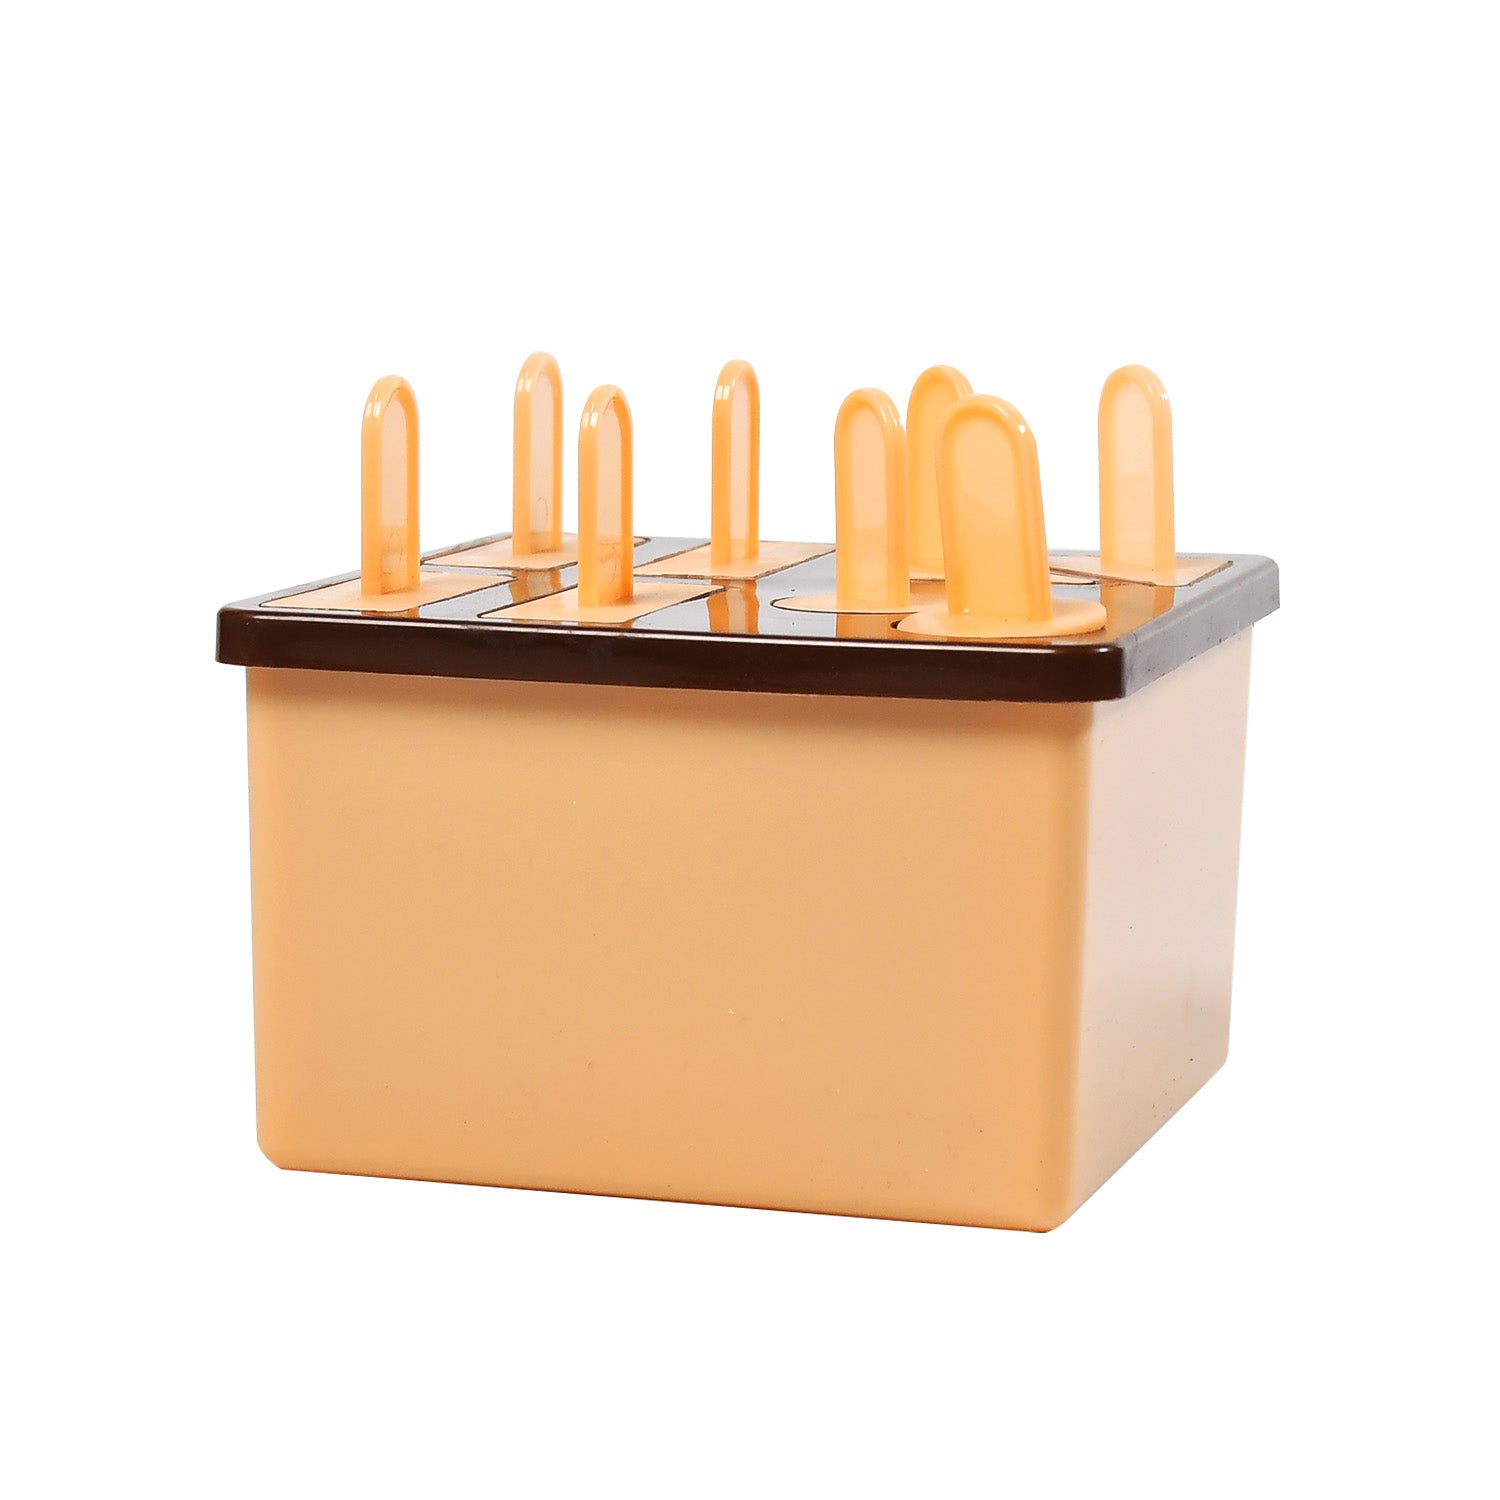 6316B  Plastic Kulfi Mould, Kulfi Moulds 8 pcs Tray Ice Cream Mould Reusable Frozen Kulfi Maker Popsicle Sticks Lolly Ice Popsicle Candy Mould for Children pink Color Brown Box DeoDap